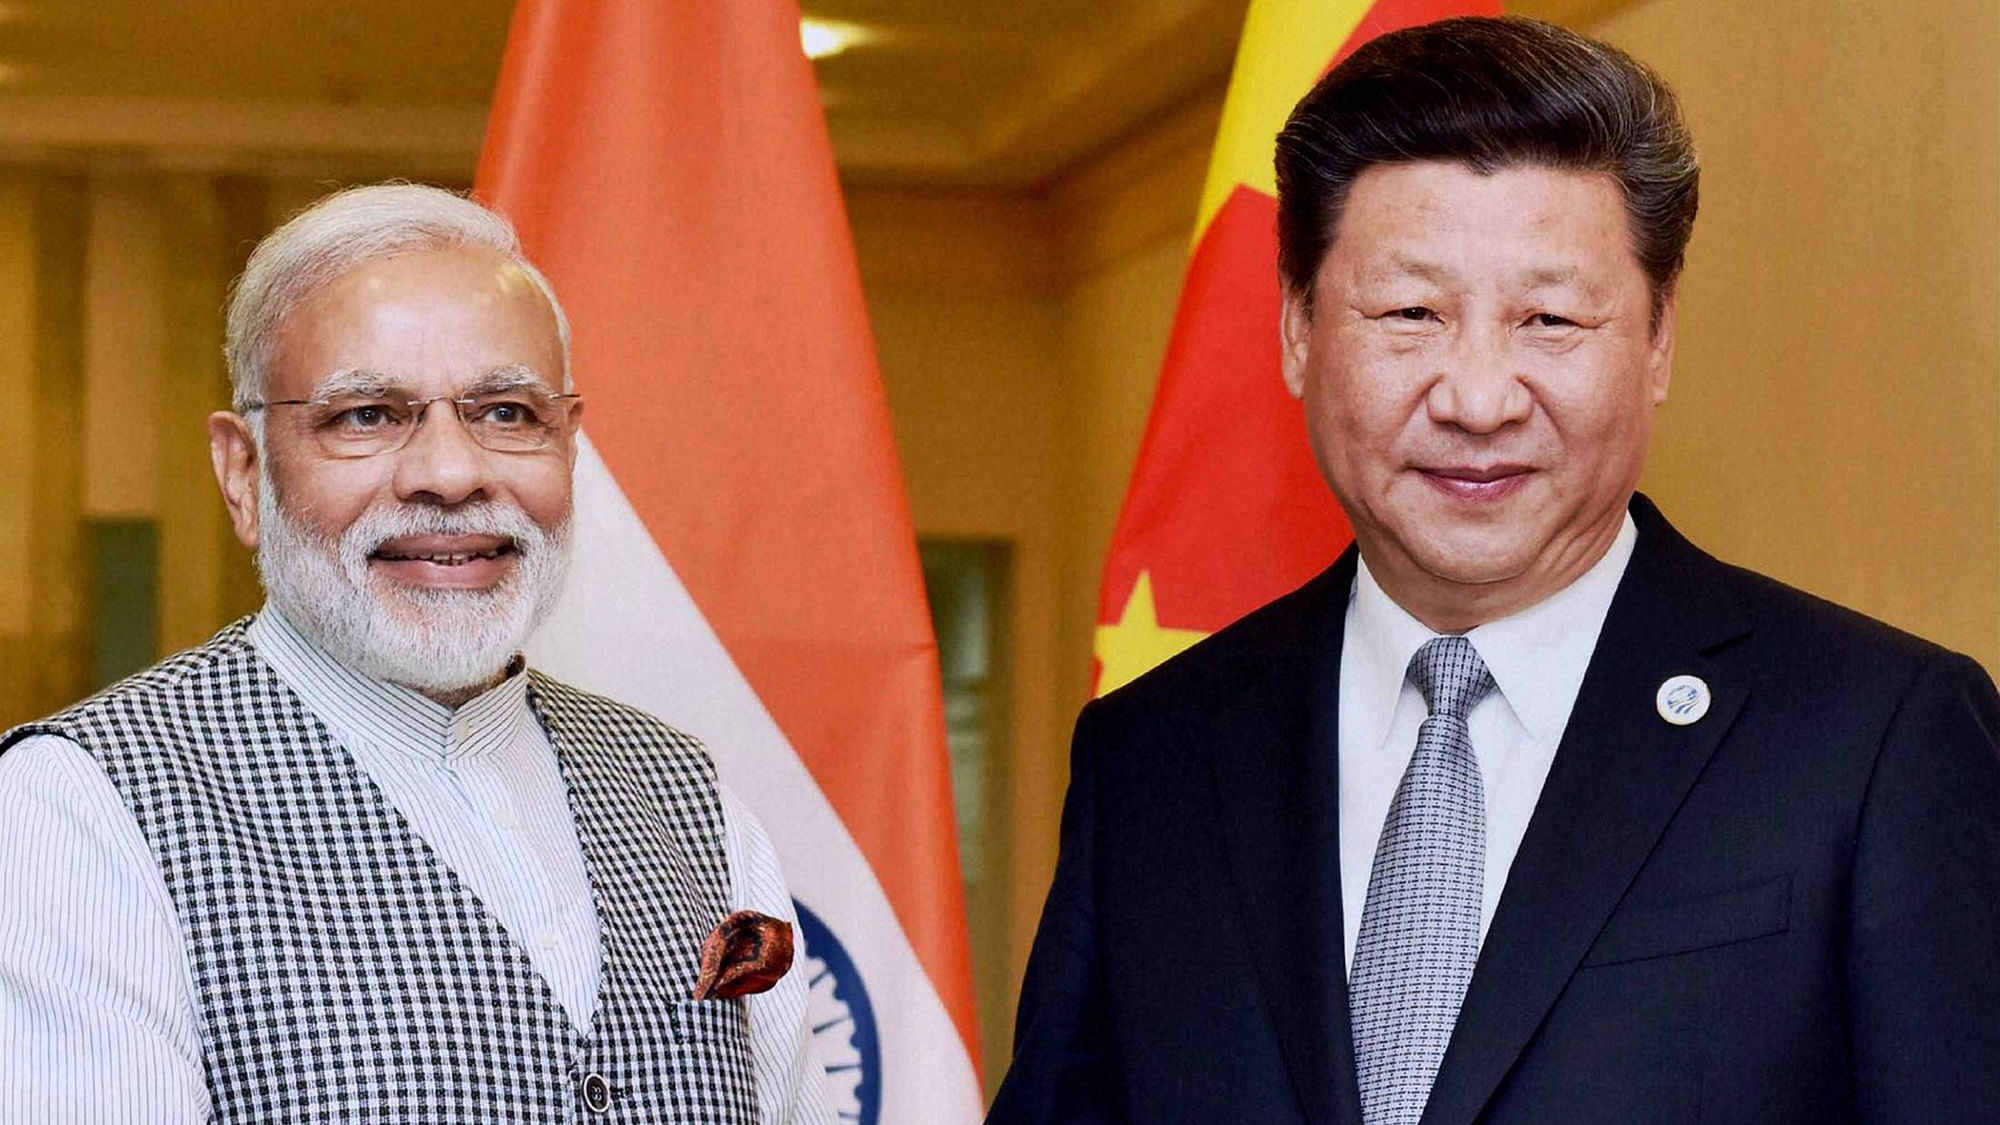 File image of Prime Minister Narendra Modi and Chinese President Xi Jinping. They both will meet next week on the sidelines of the Shanghai Cooperation Organisation (SCO) Summit at Bishkek.&nbsp;